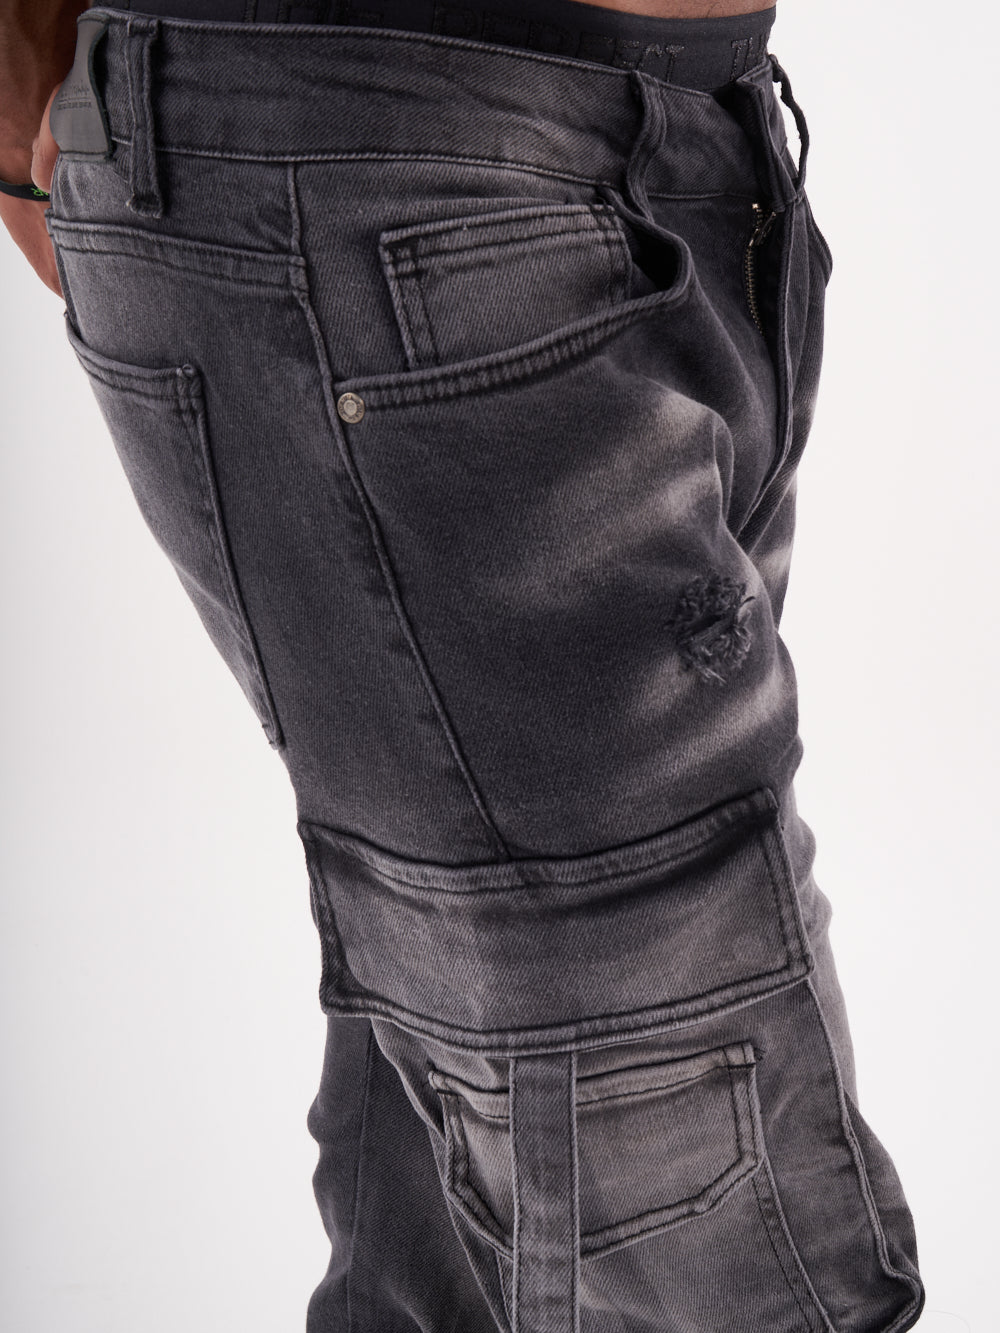 A man is wearing a pair of black HIPSTER cargo pants.